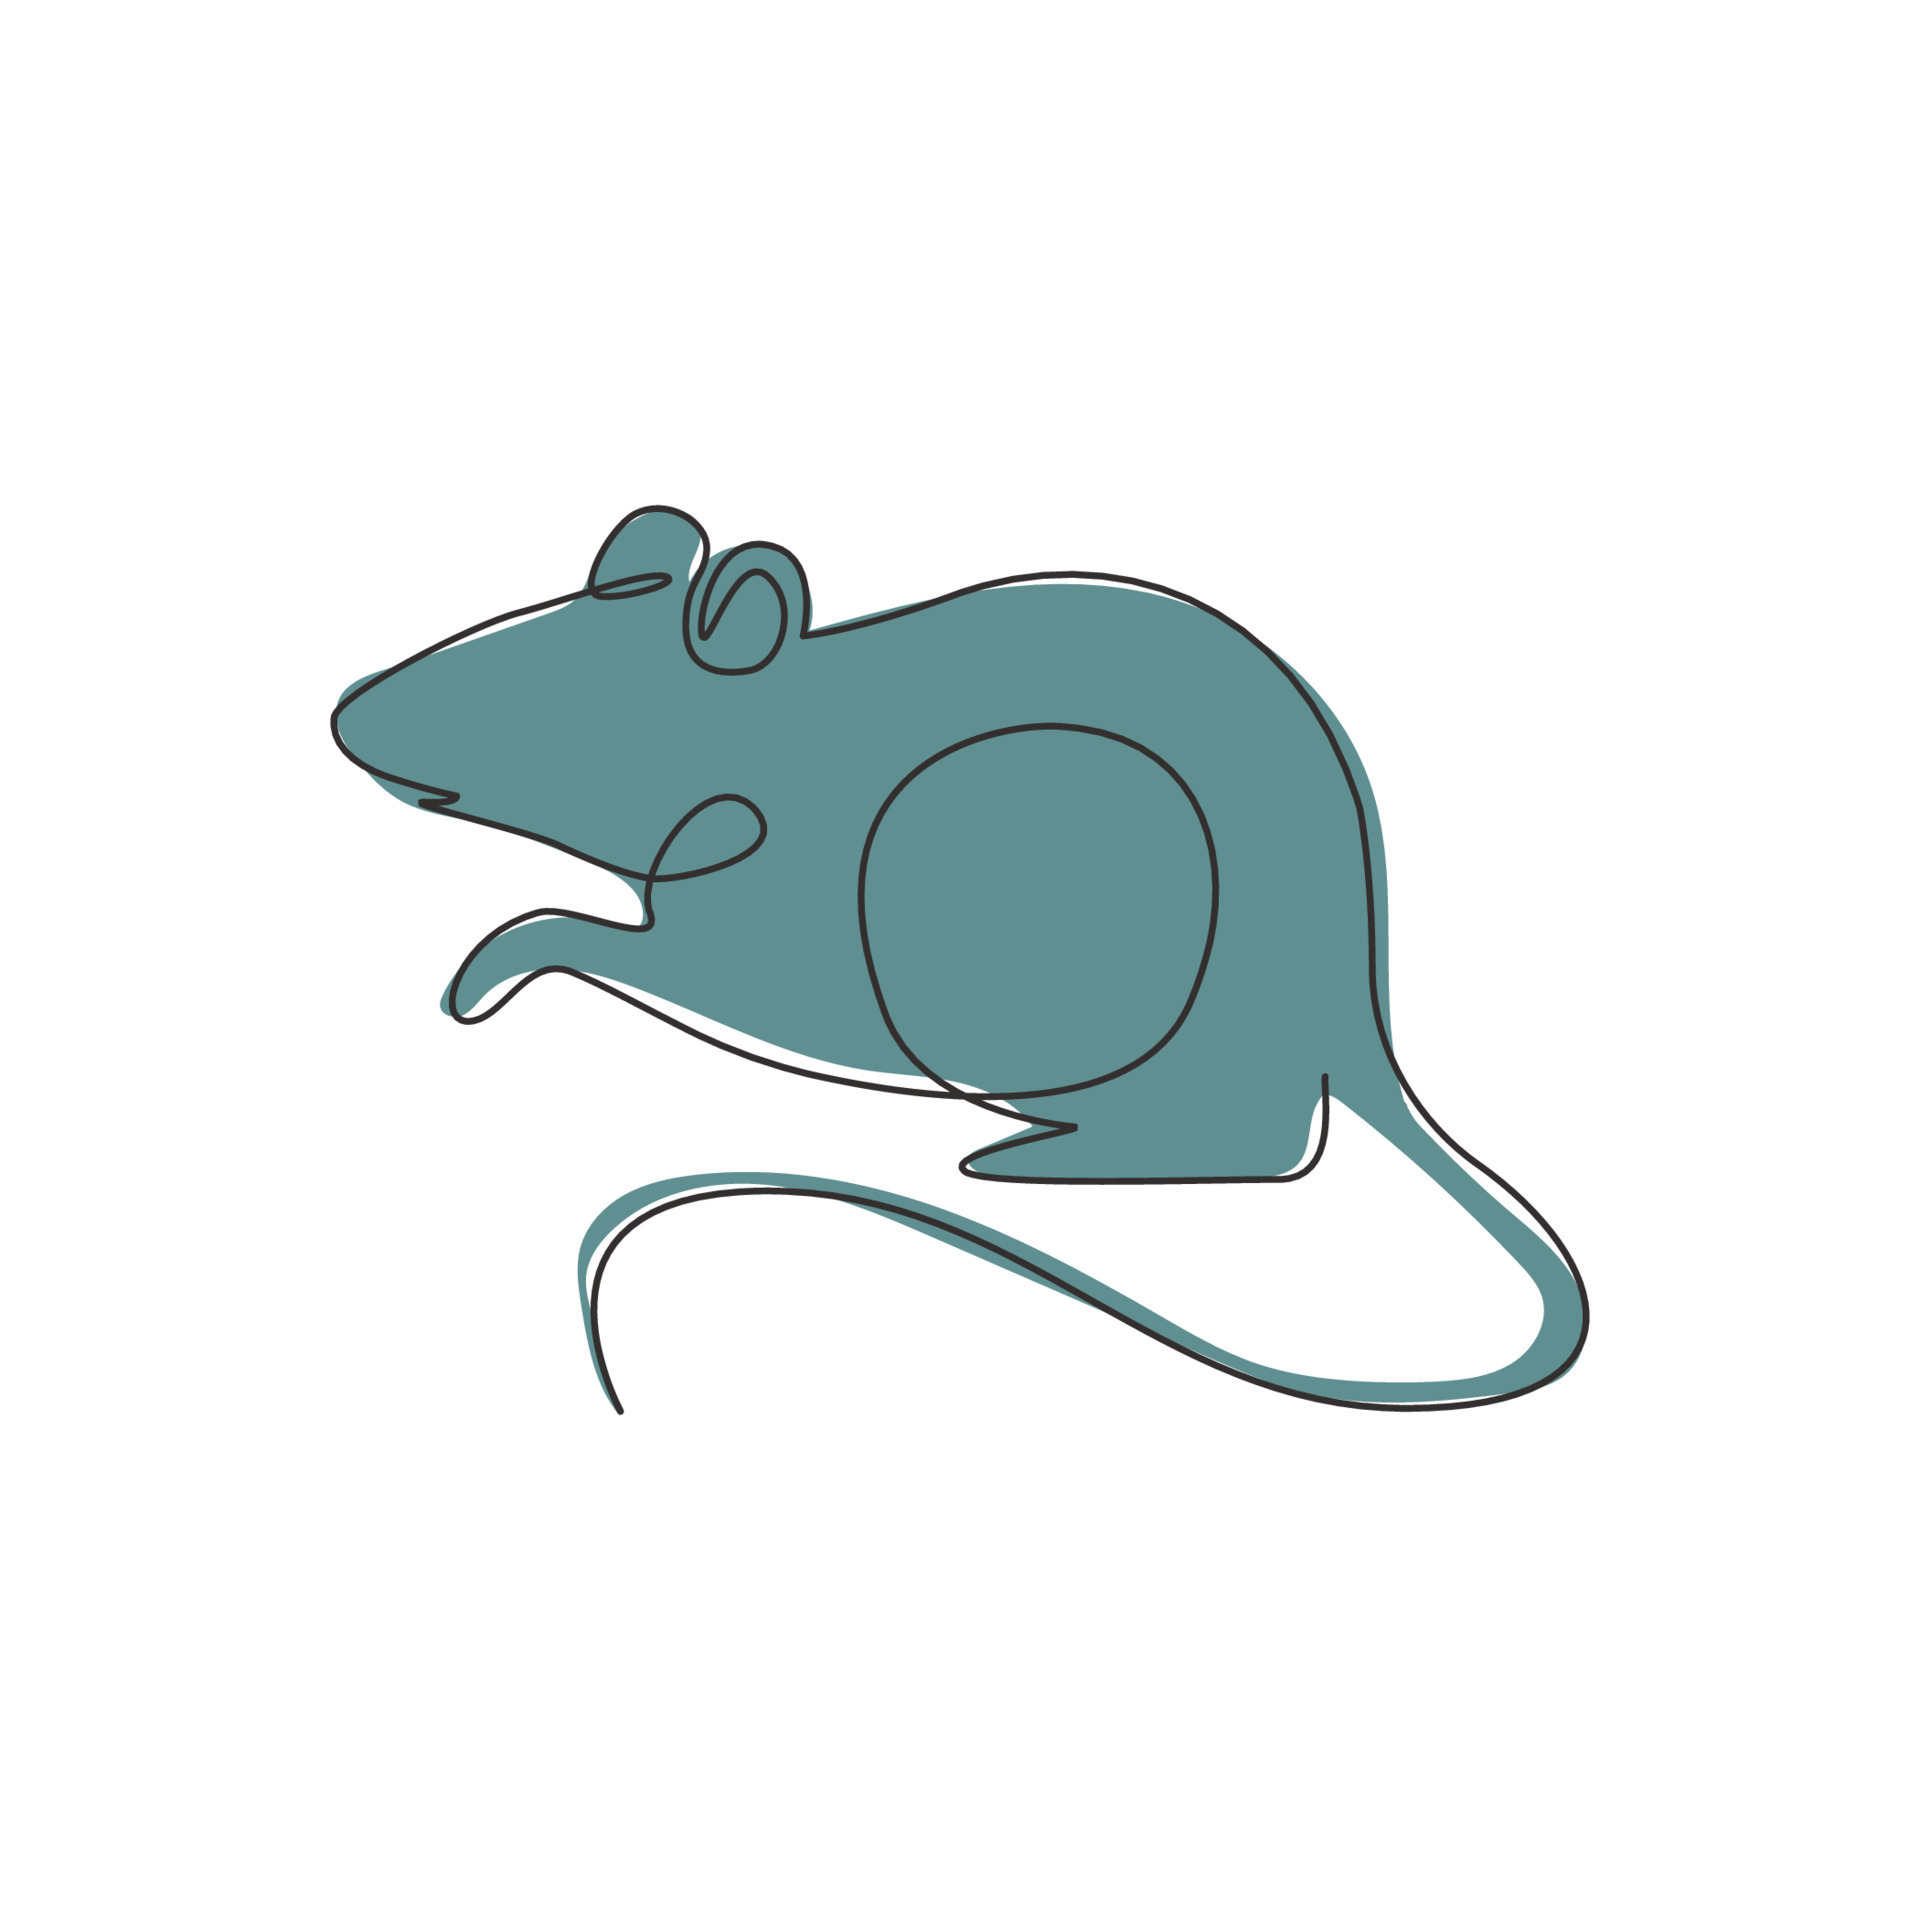 Cute Little Mouse With Big Eyes Coloring Page Outline Sketch Drawing  Vector, Small Animal Drawing, Small Animal Outline, Small Animal Sketch PNG  and Vector with Transparent Background for Free Download